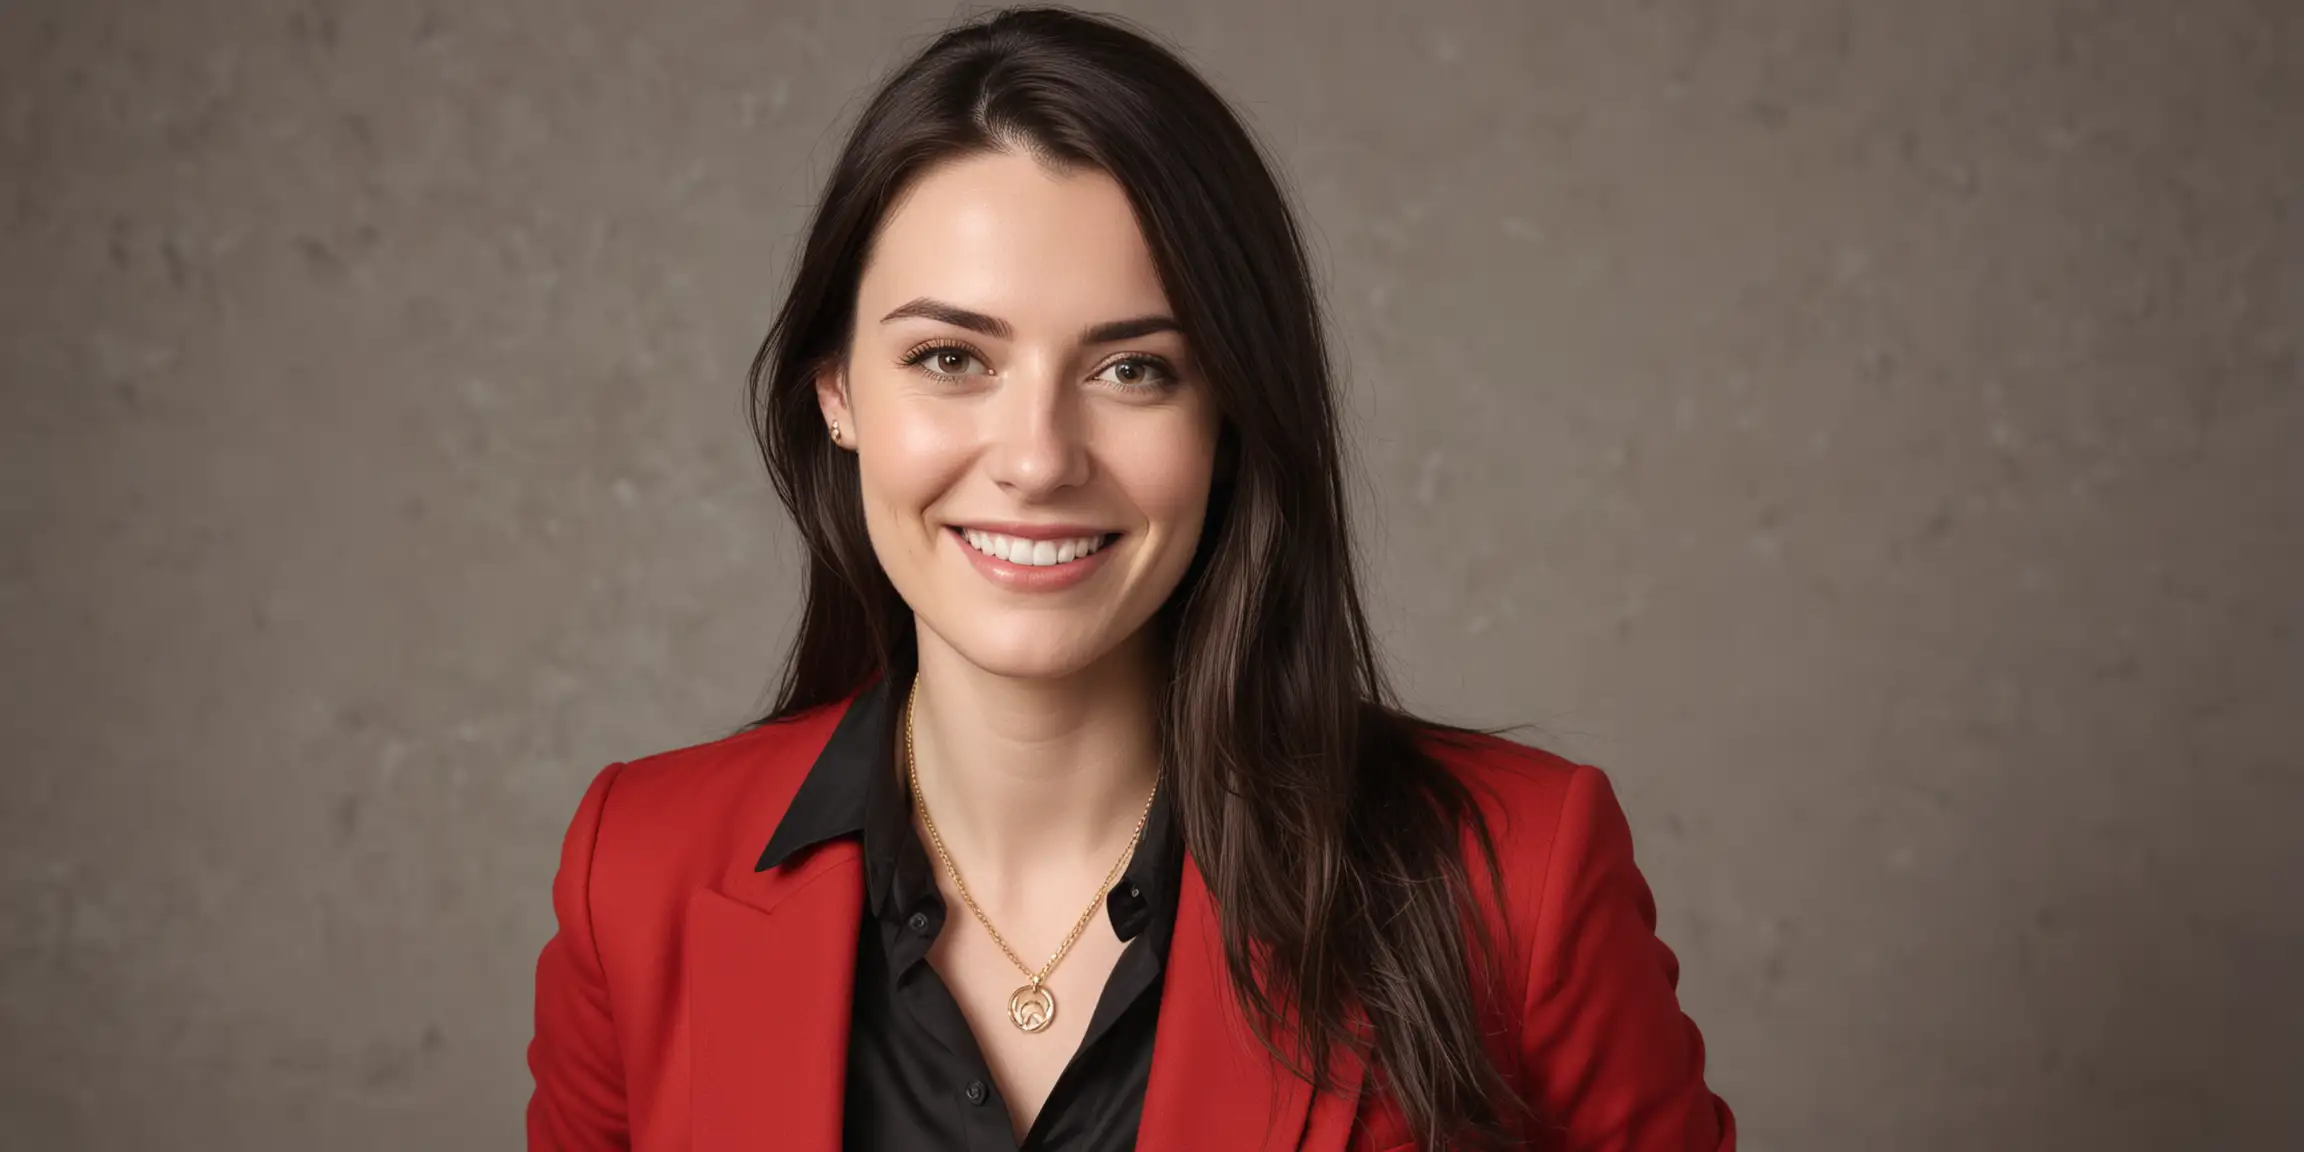 30 year old pale white woman with long dark brown hair, wearing a buttoned up red blazer, simple gold necklace, plain black shirt and black dress pants. She is smiling at camera with eyebrows raised. She might be of Danish or German descent.